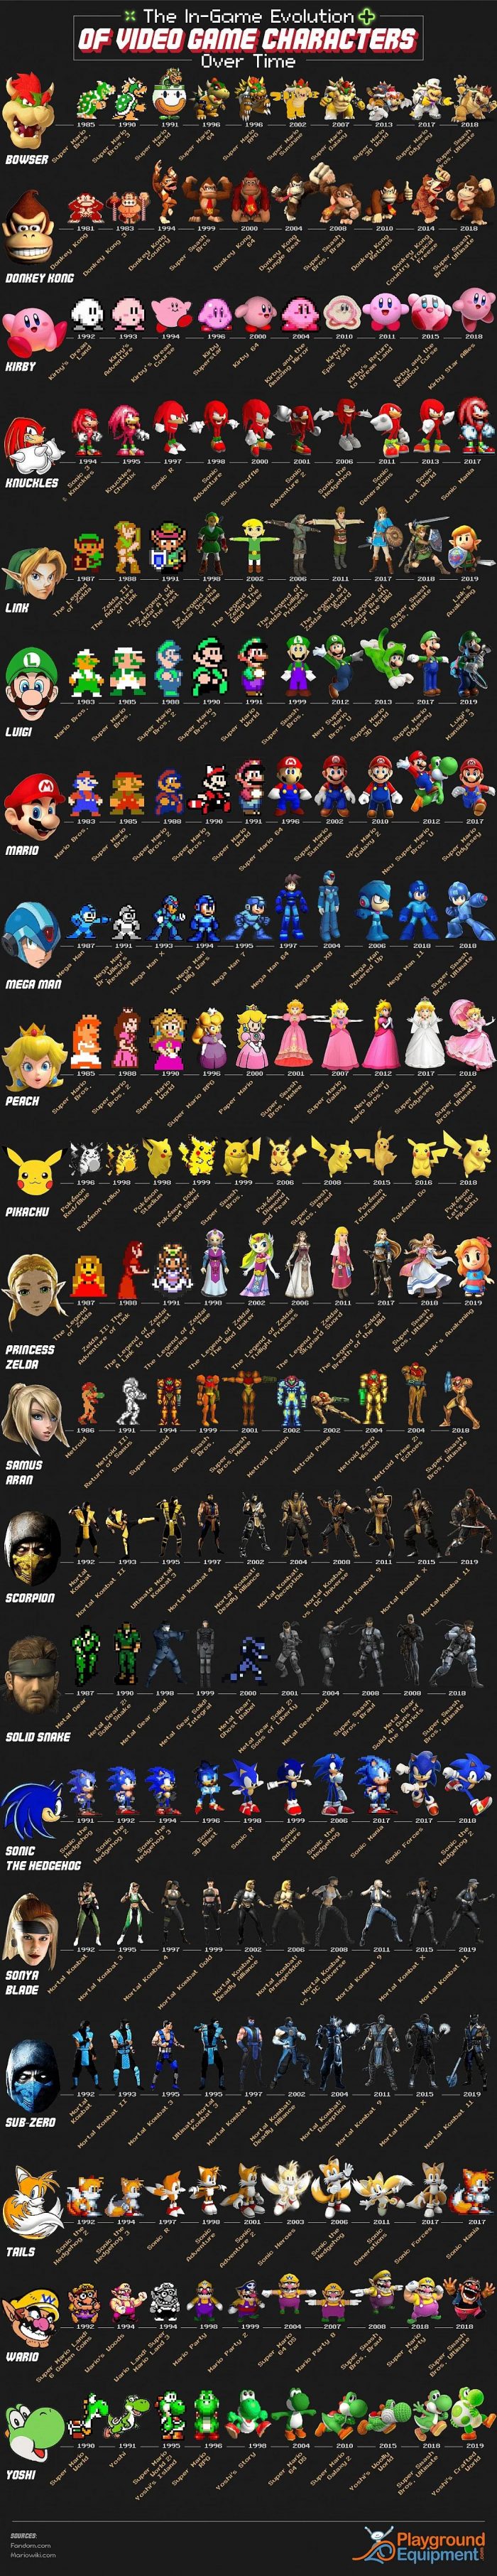 The Evolution Of Video Game Characters [INFOGRAPHIC]